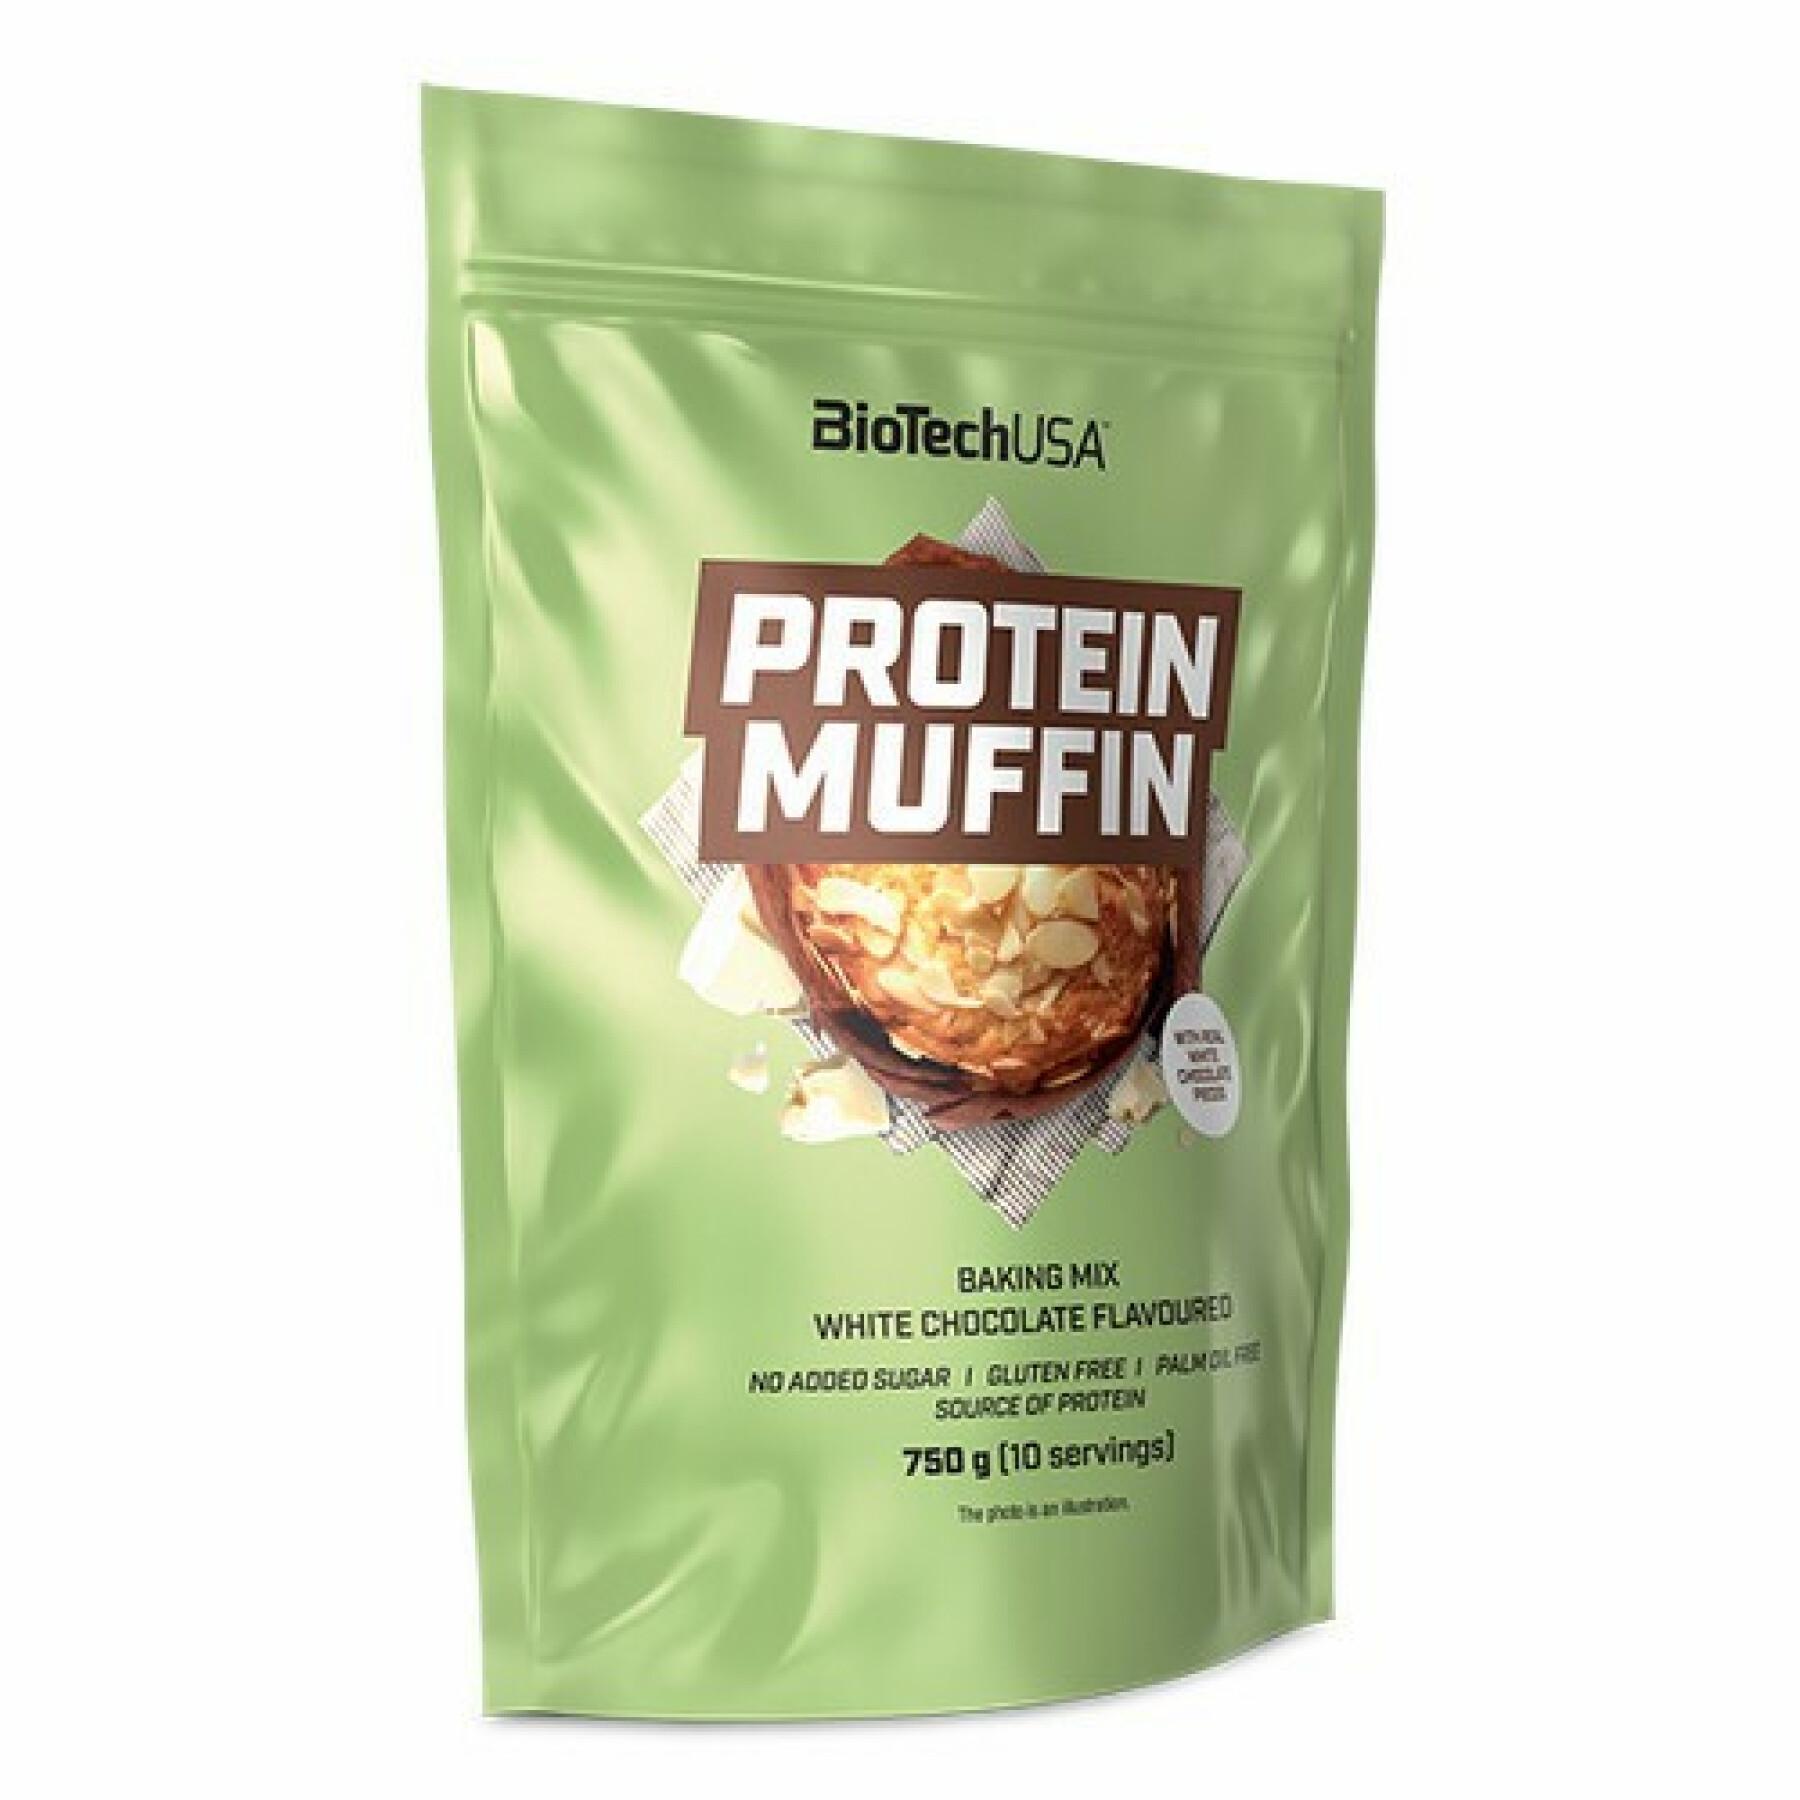 Pack of 10 bags of protein snacks Biotech USA muffin - Chocolat blanc - 750g